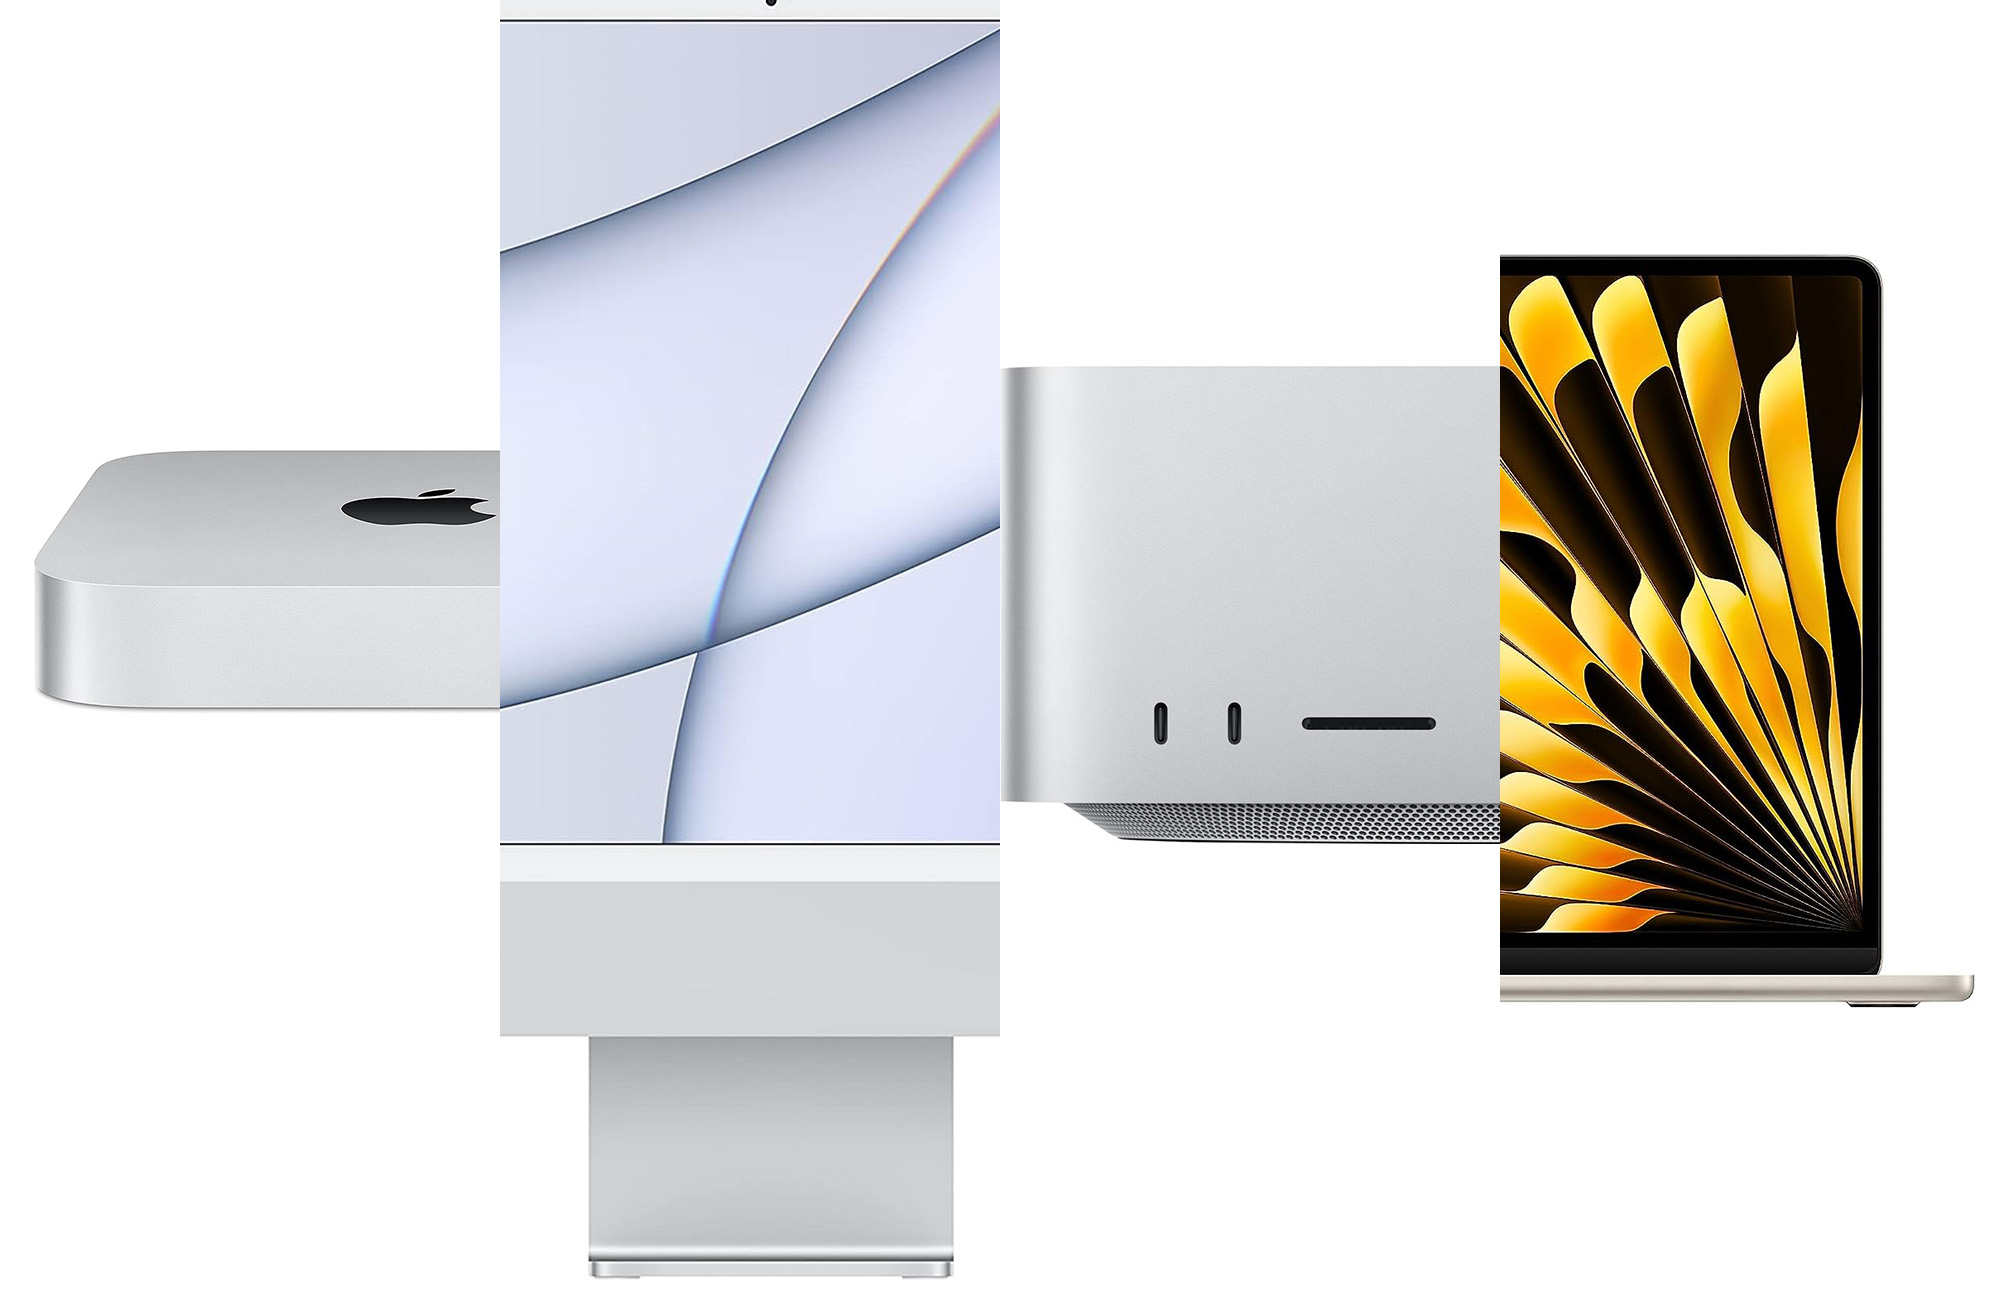 The Complete History of the iMac: Launch, Models, Pricing, and More -  History-Computer